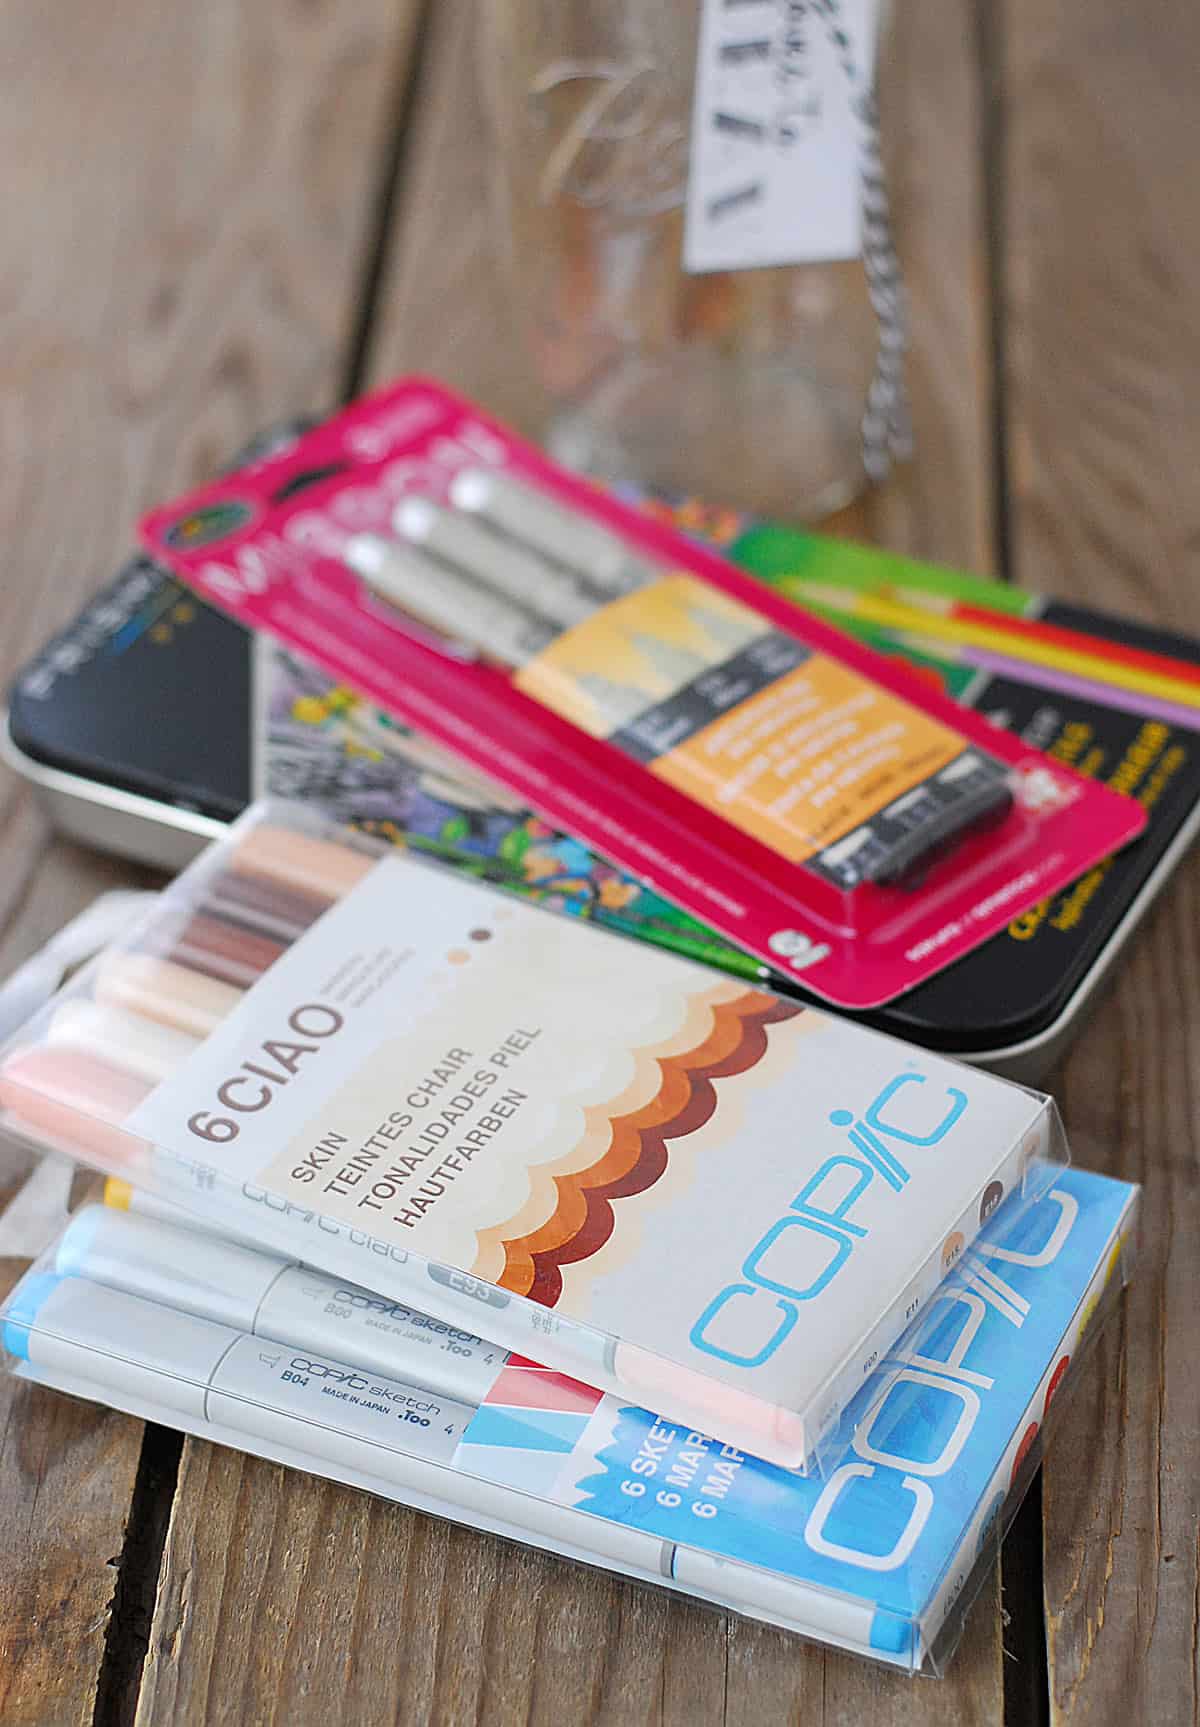 Copic markers and art supplies.